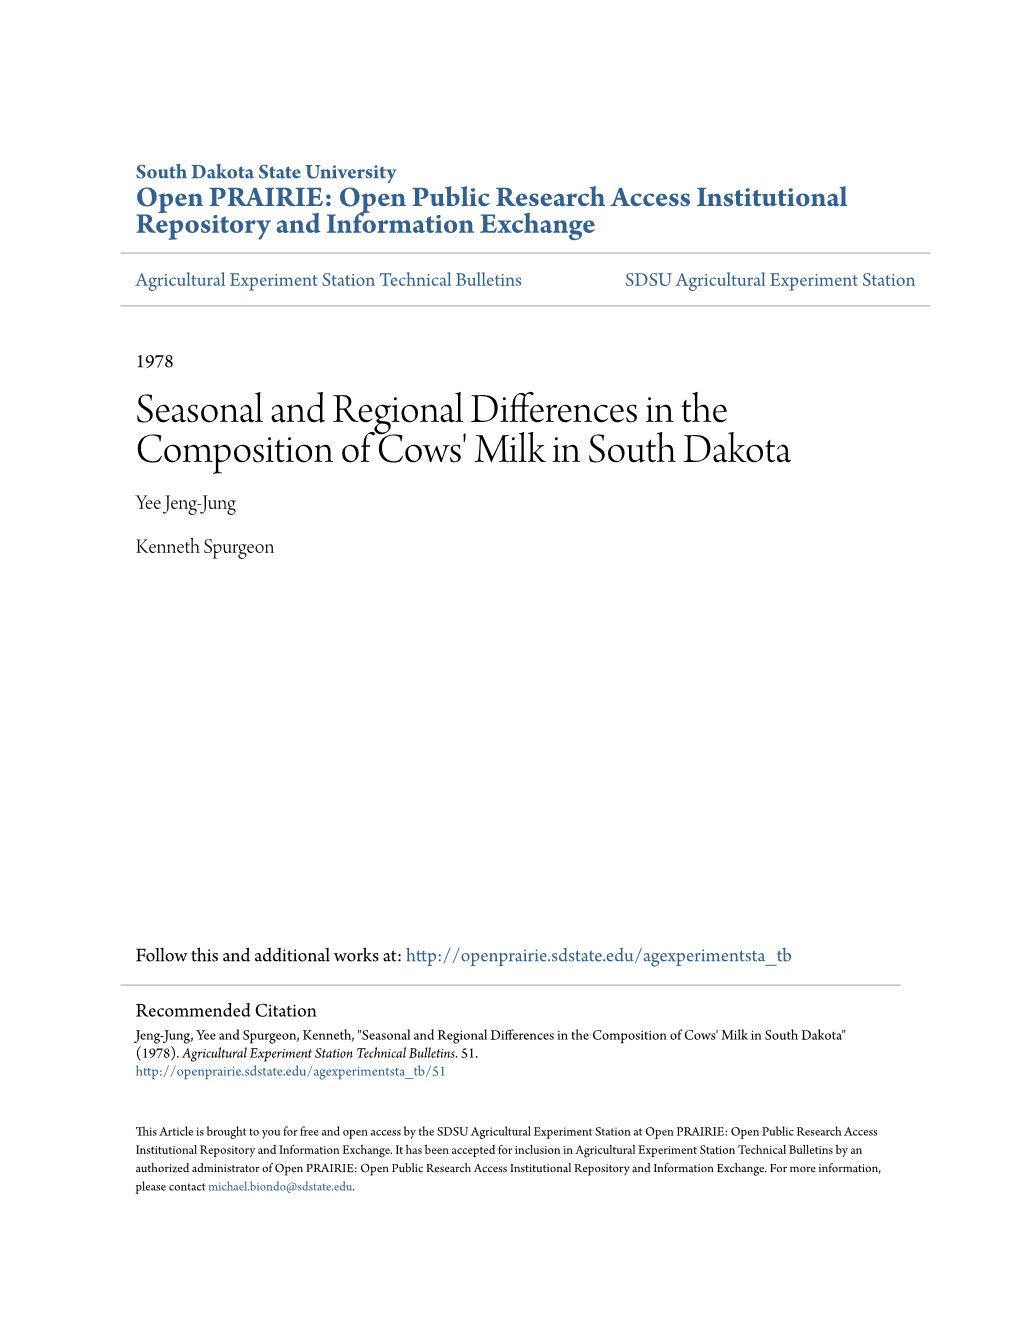 Seasonal and Regional Differences in the Composition of Cows' Milk in South Dakota Yee Jeng-Jung